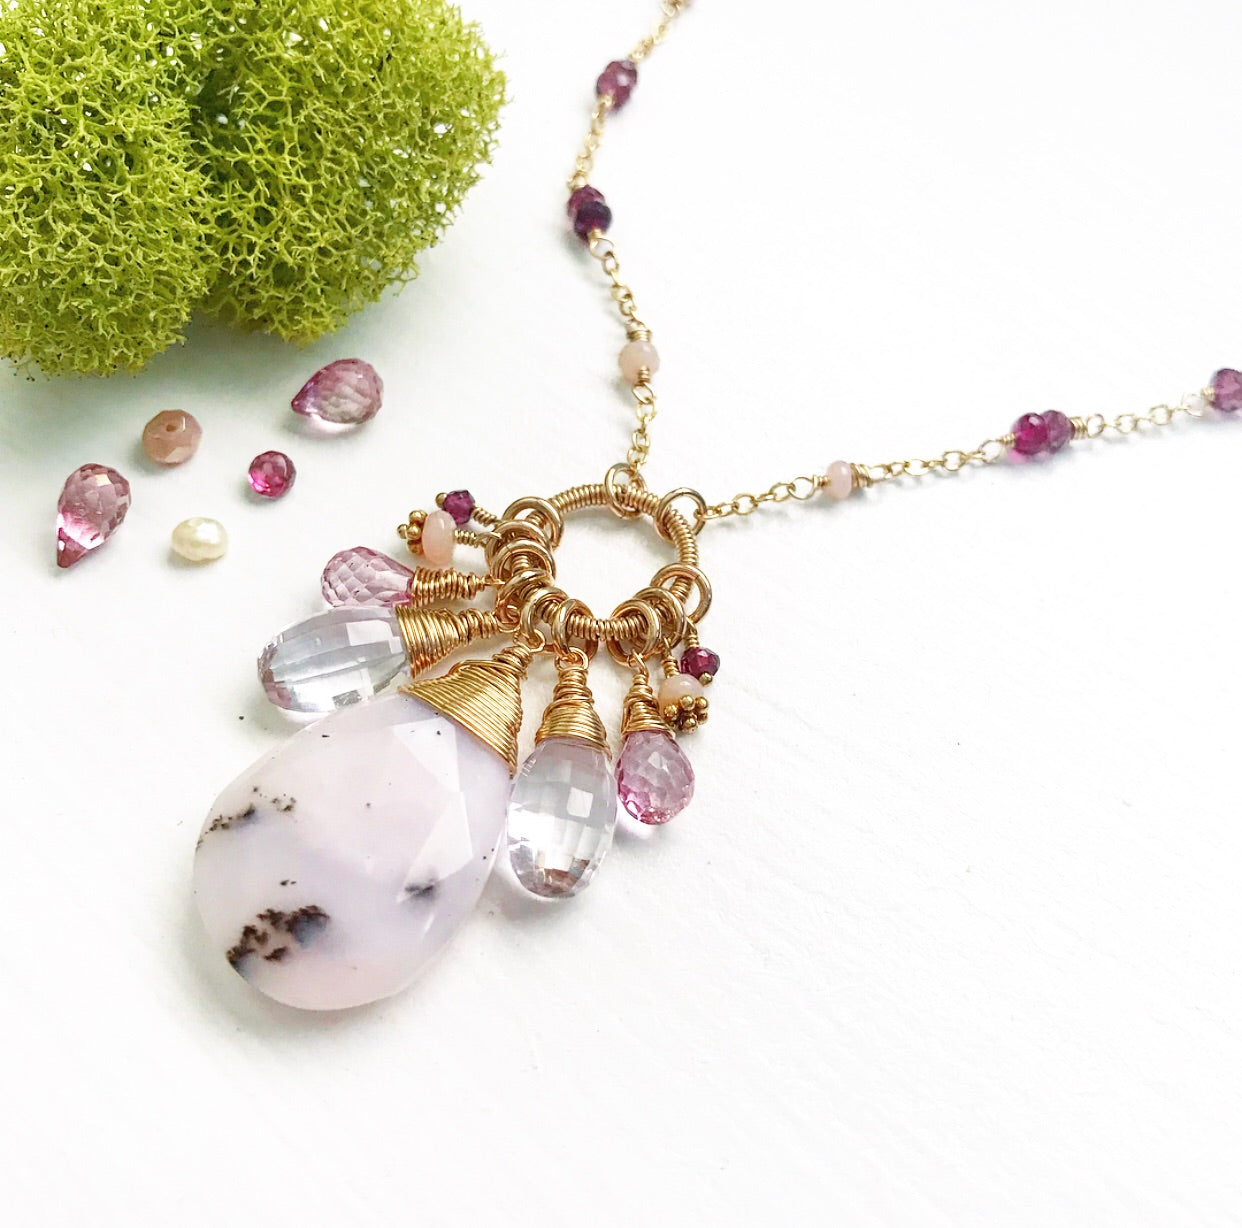 620-One of a Kind Gemstone Drop Necklace